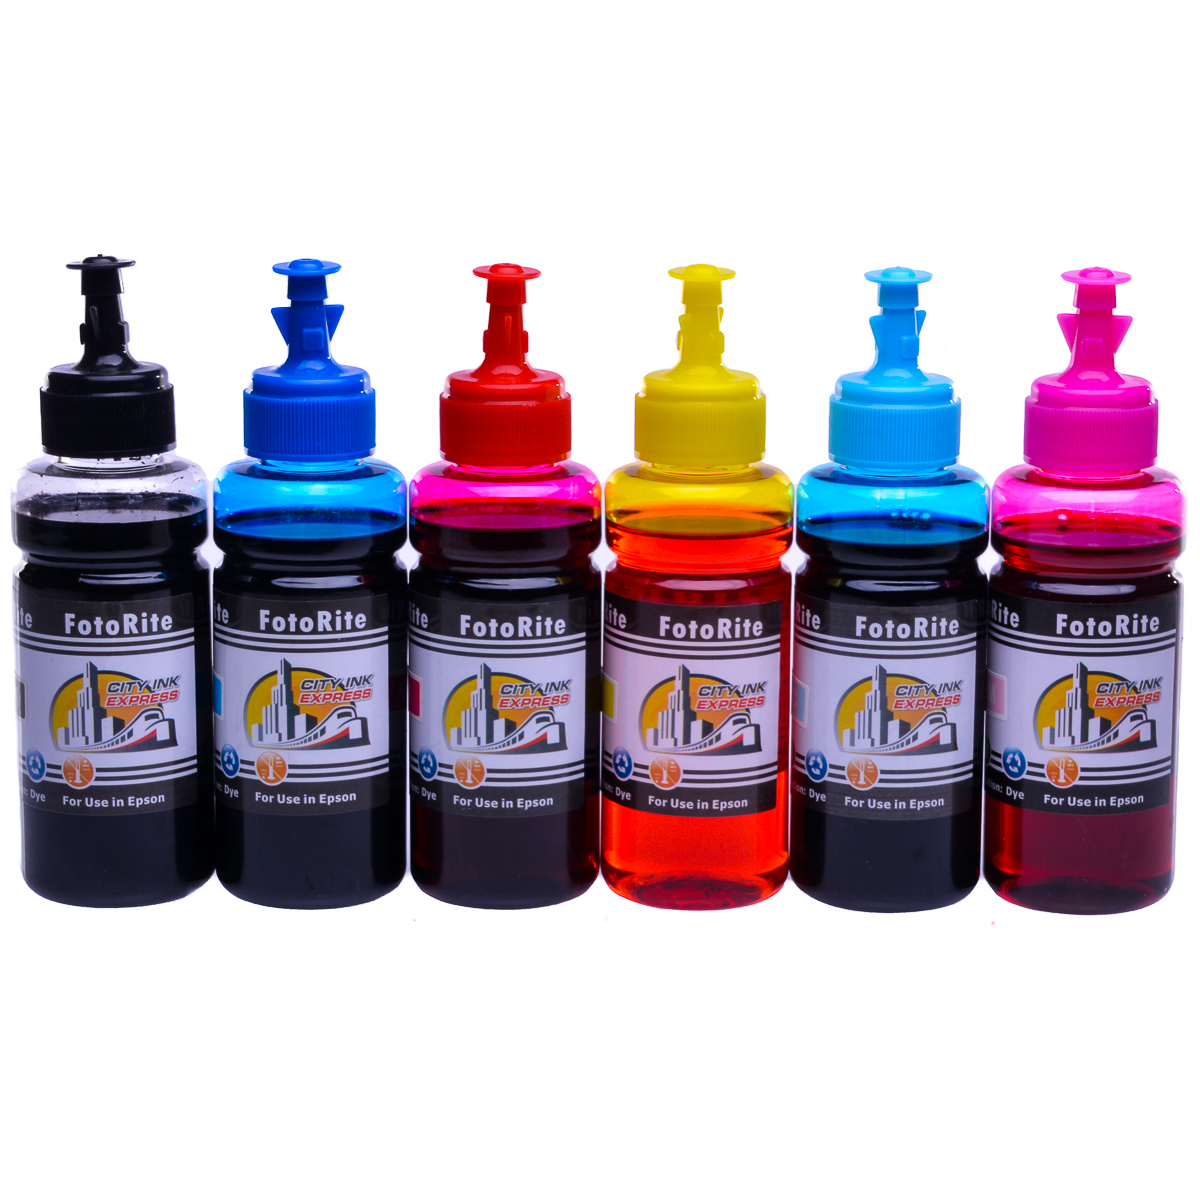 Cheap Multipack dye ink refill replaces Epson Stylus 1500W